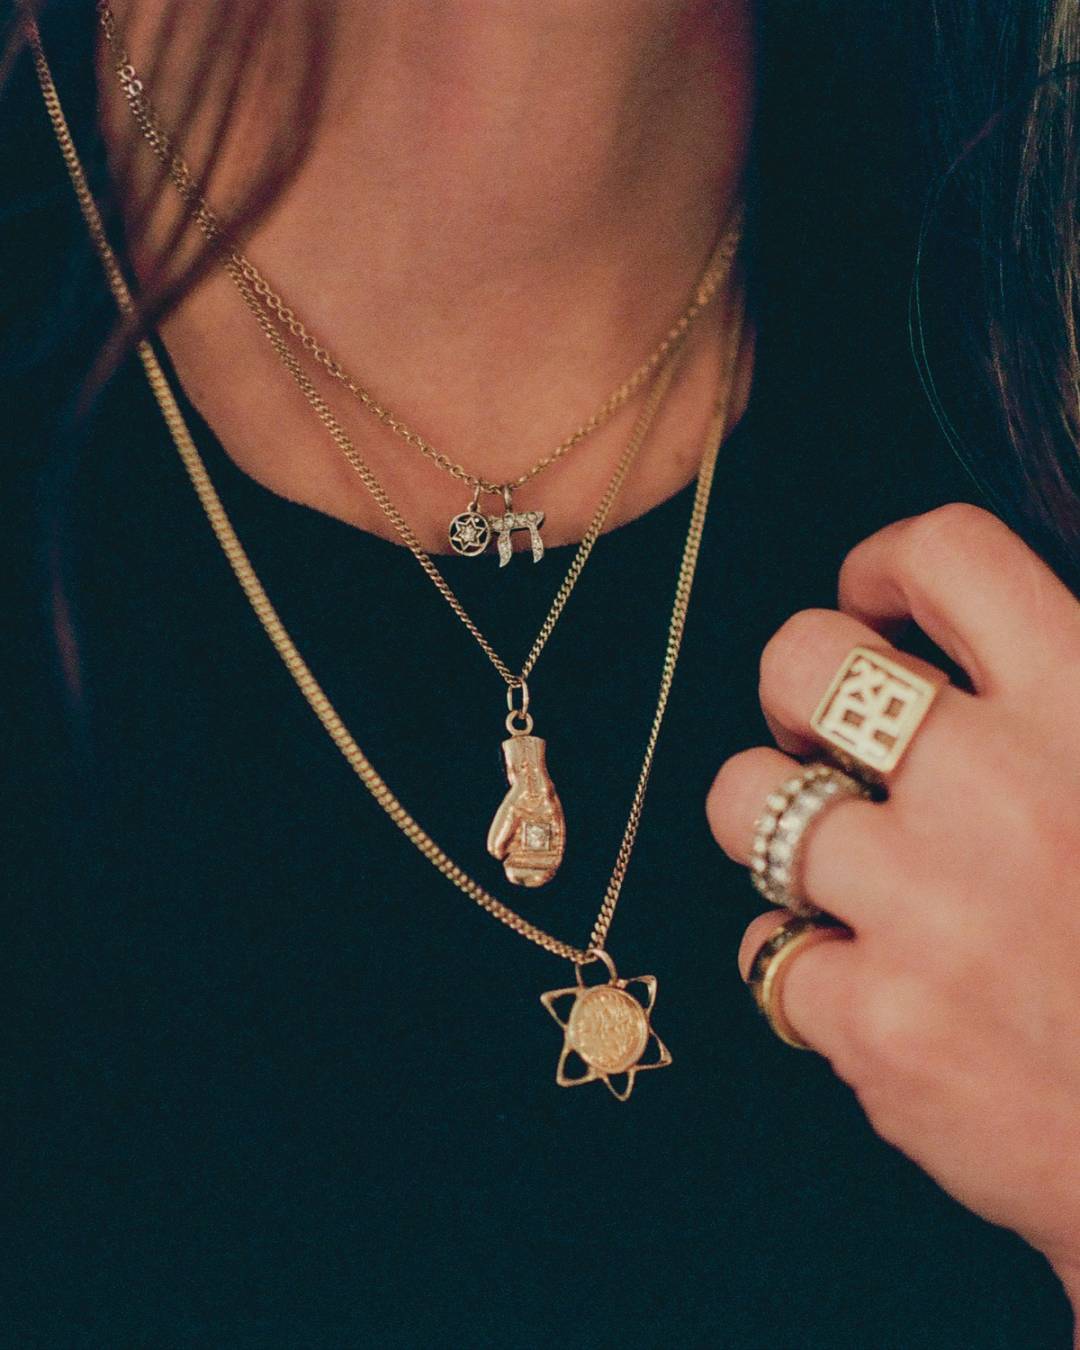 ‘For as long as I can remember, if I see vintage Jewish jewelry, I buy it, because if I don’t, I’m very scared it’s gonna get melted,’ says jeweler Mara Bernstein, owner of Pennyweight Prizefighter